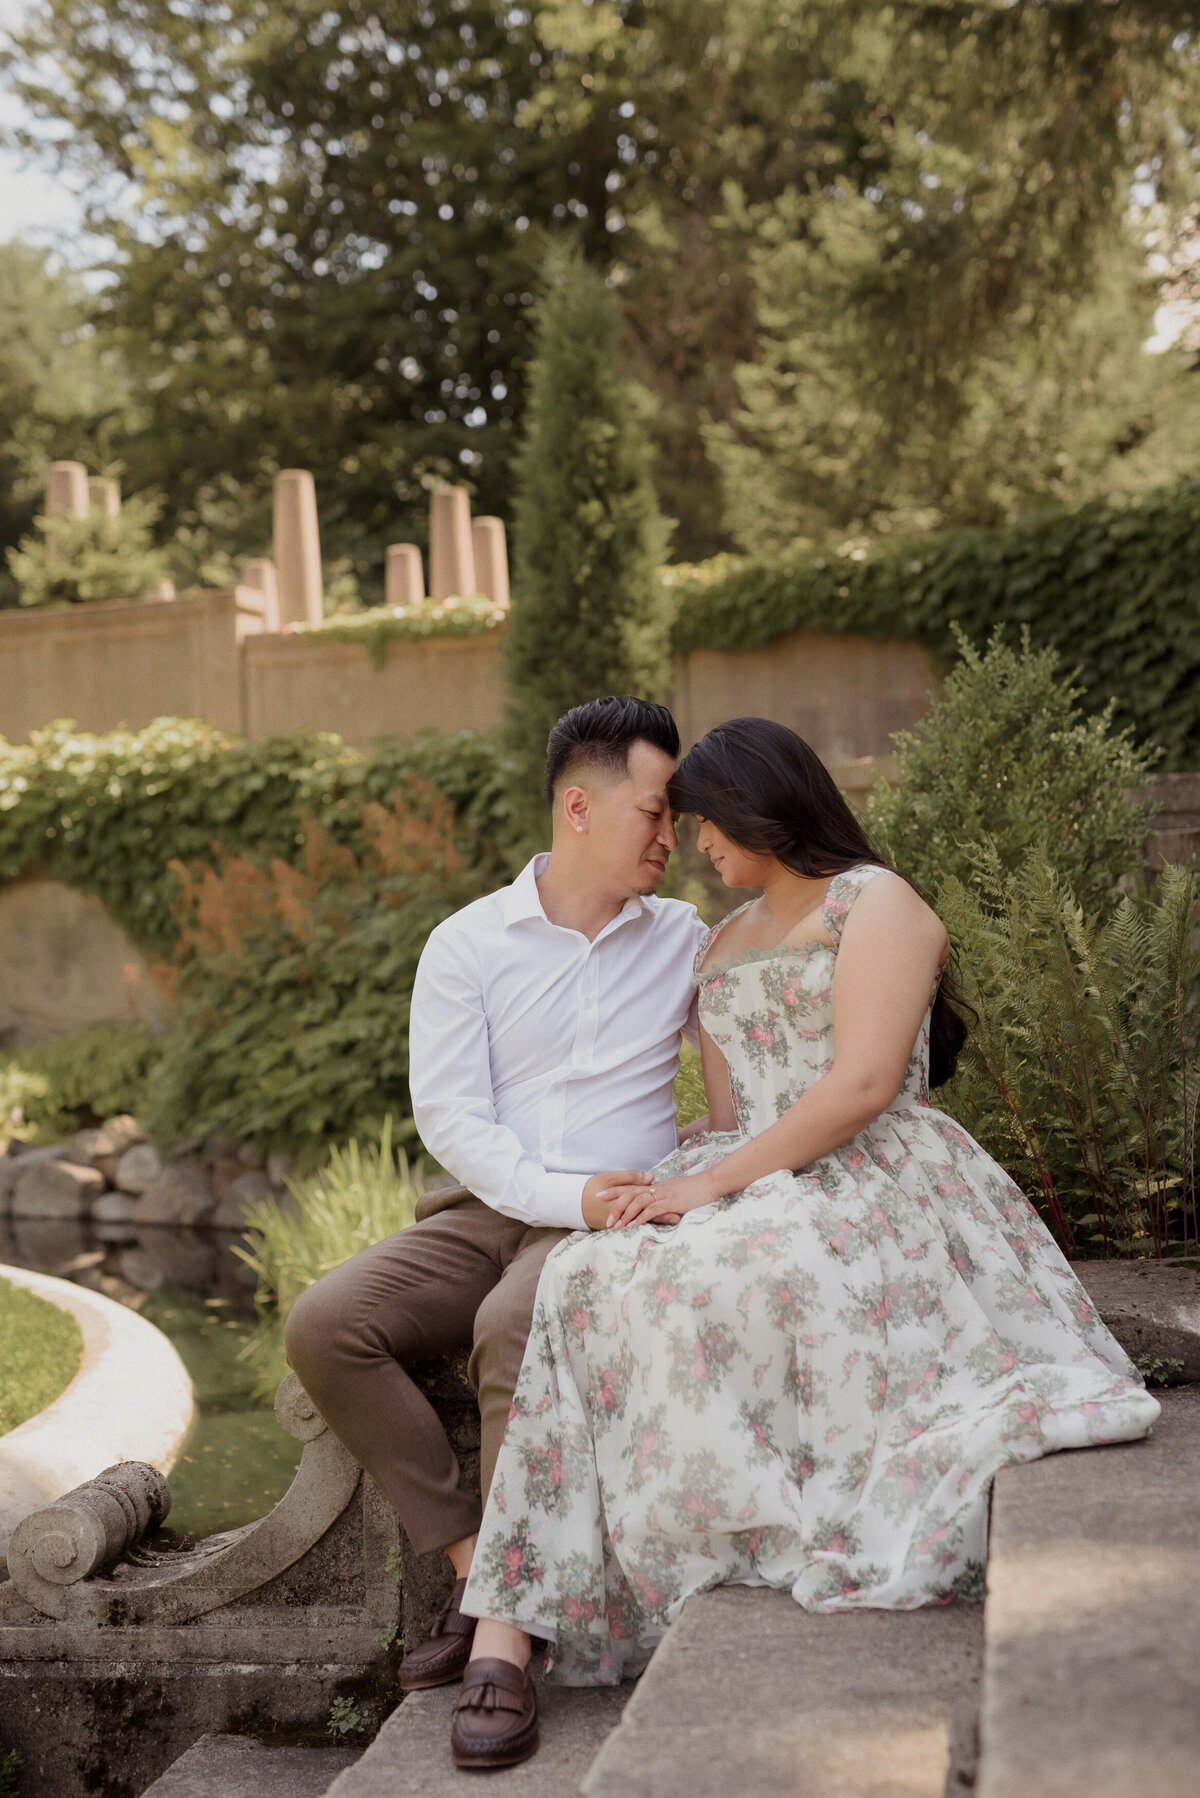 crane estate engagement session with asian couple on a hot summer day. strolling through the gardens to the great house in Massachusetts.